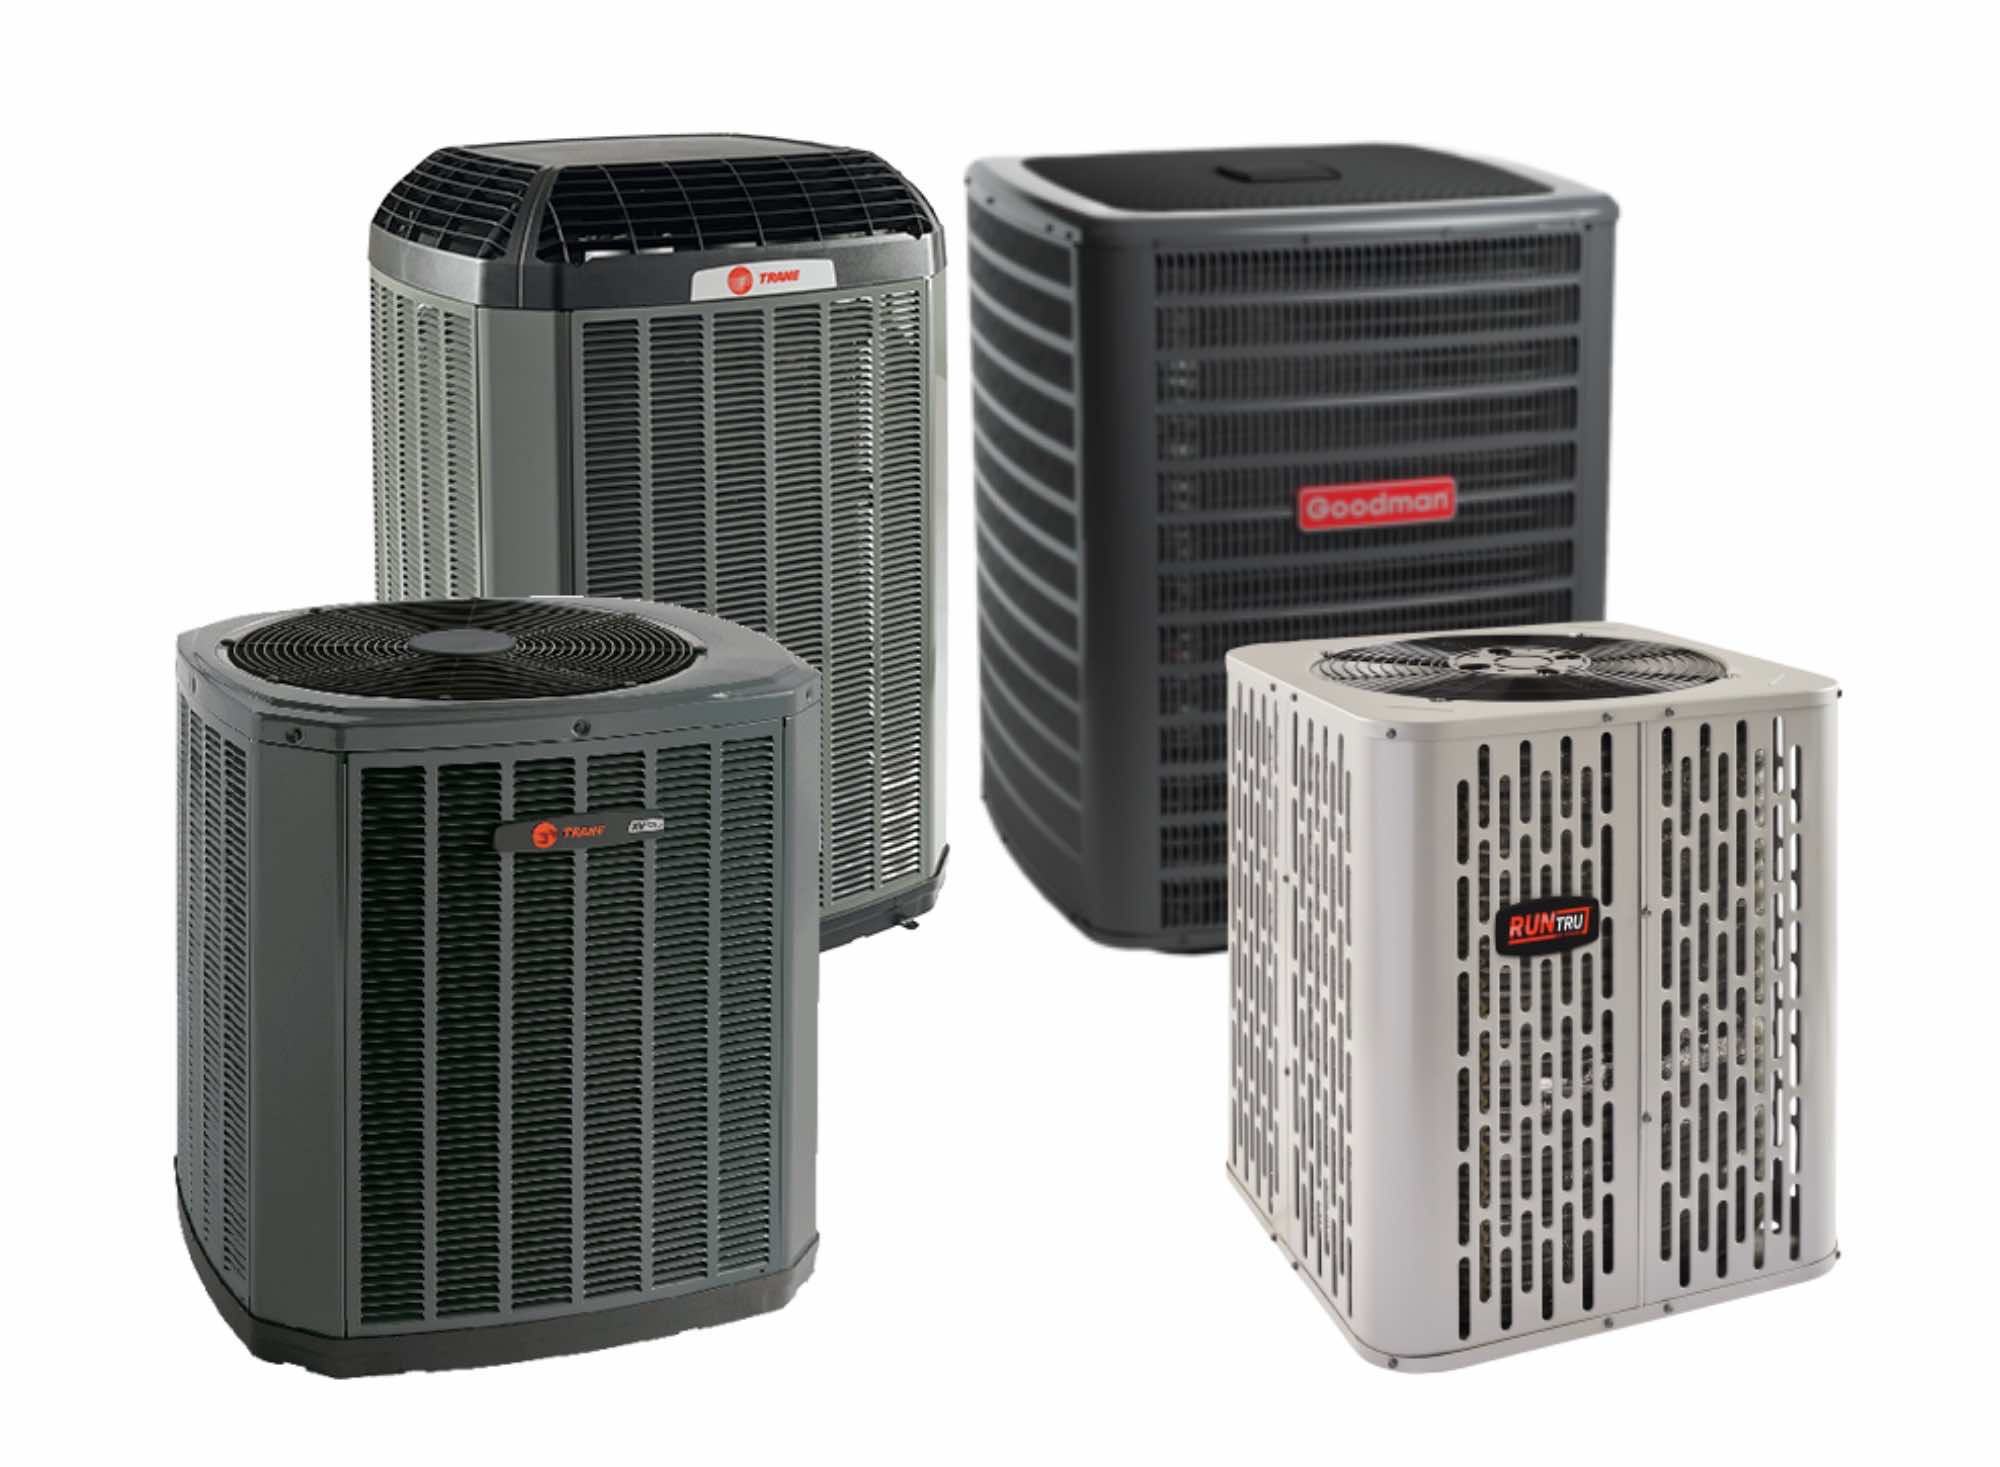 STAT Heat & Air sells and installs brands like Trane, Amana, Goodman, and others.